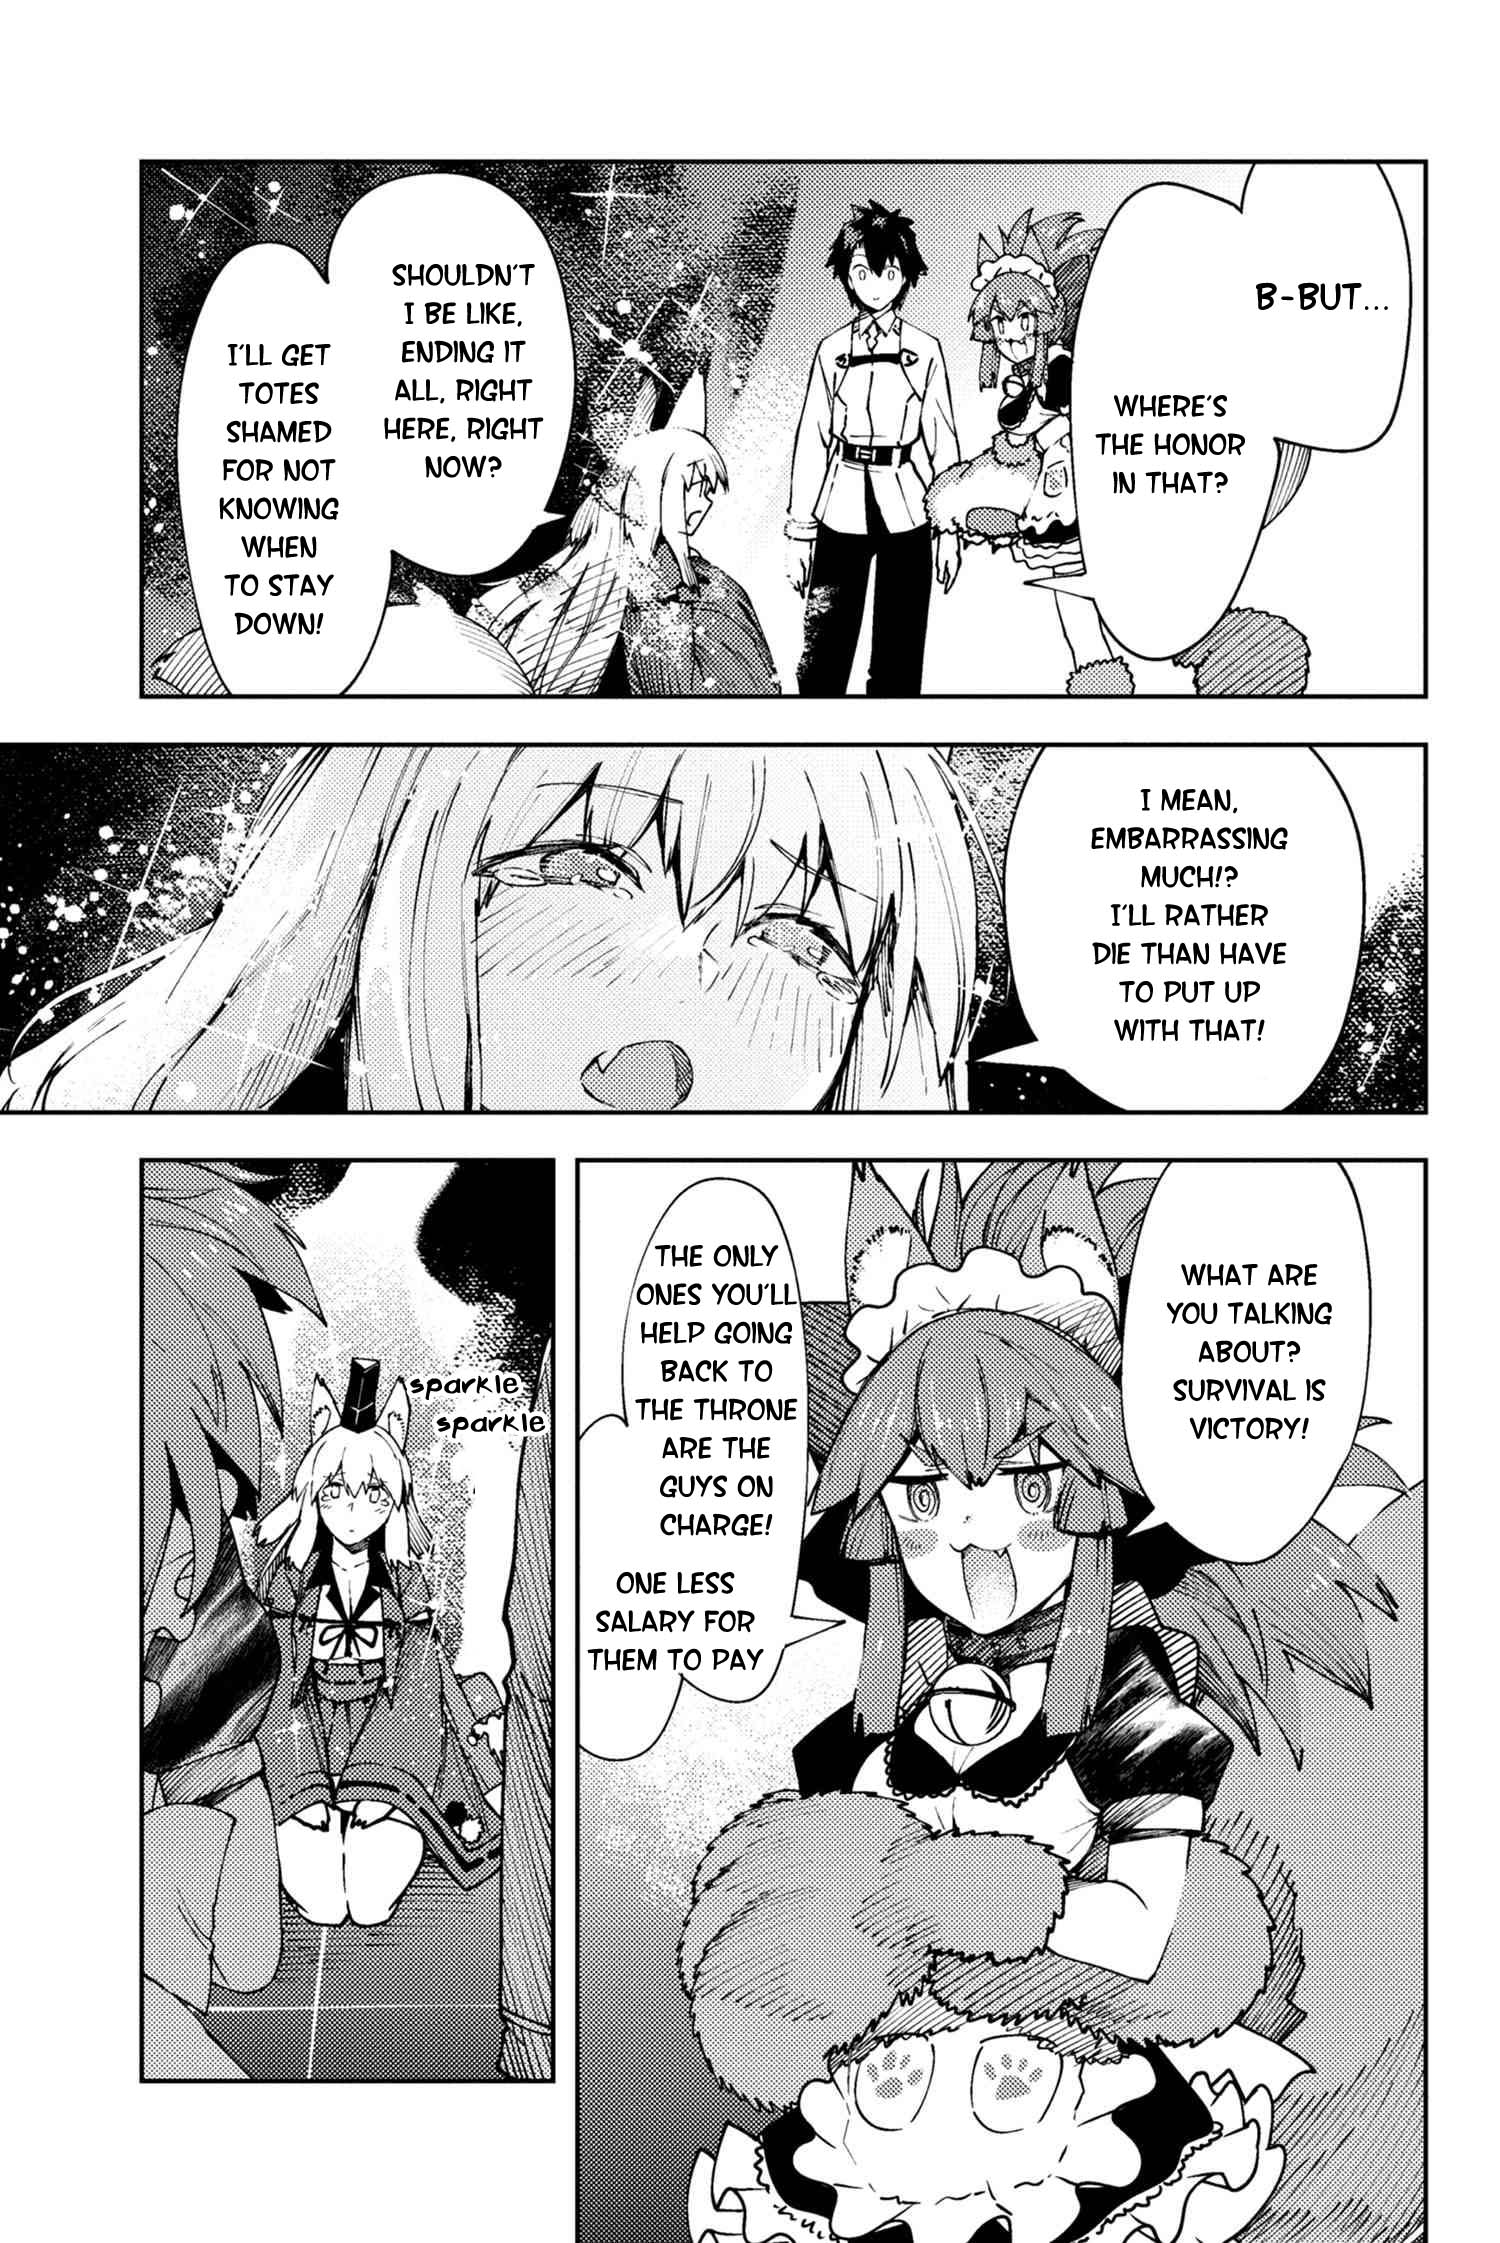 Fate/grand Order -Epic Of Remnant- Deep Sea Cyber-Paradise Se.ra.ph Chapter 27.4